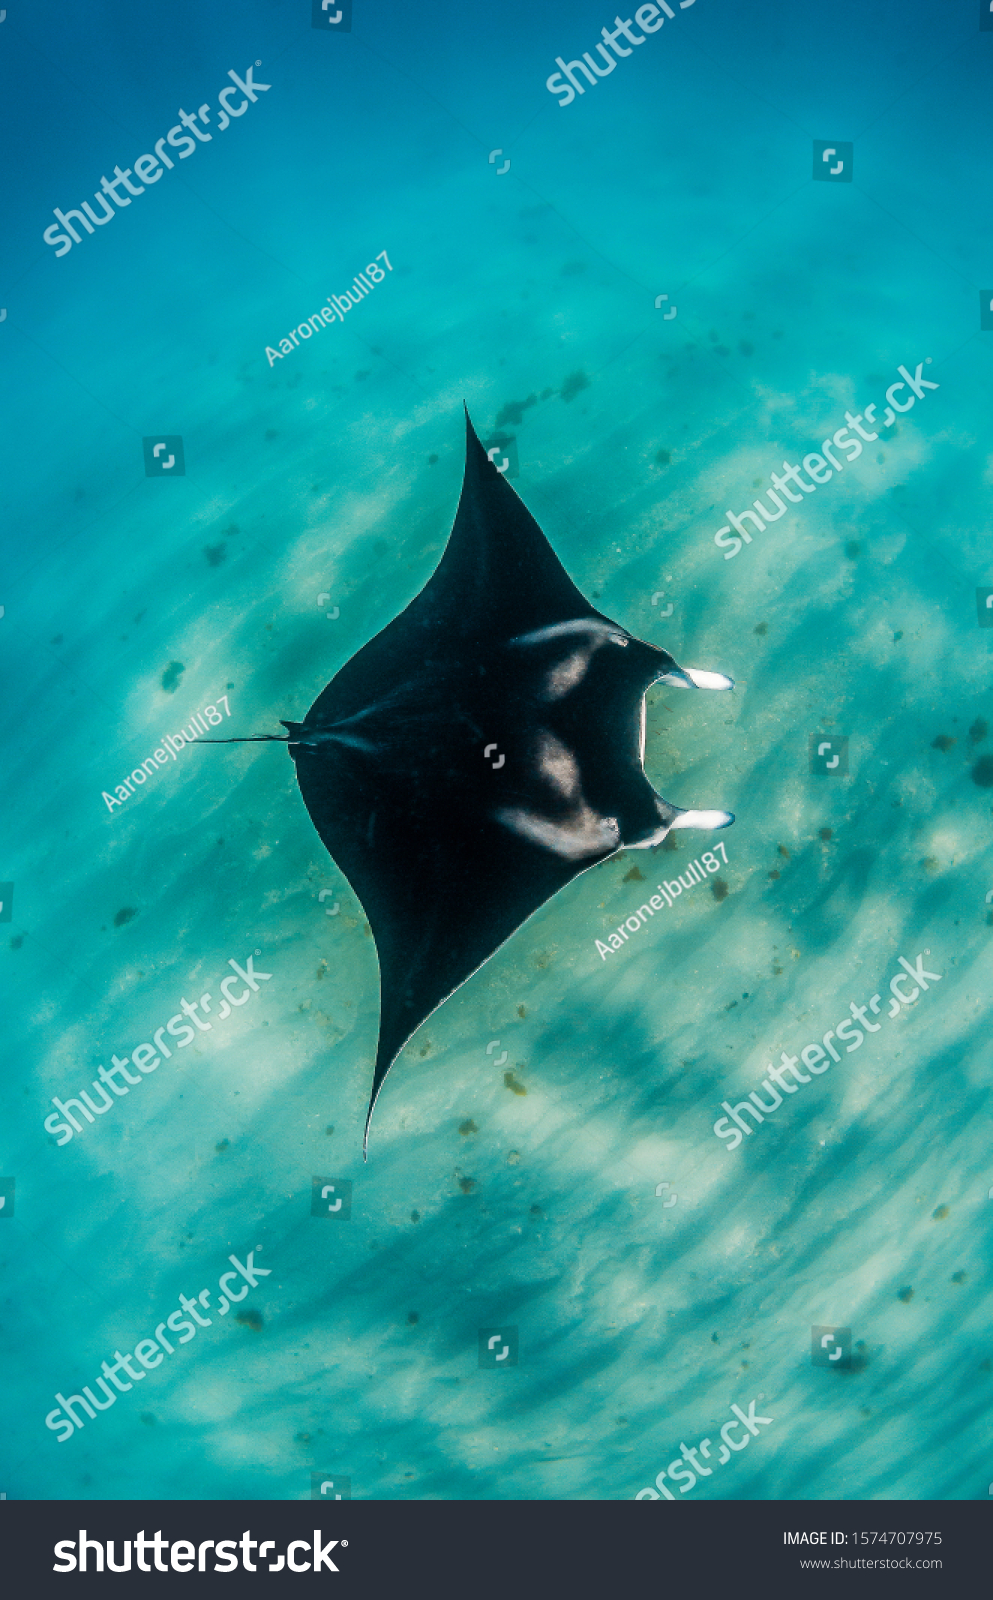 Manta Ray swimming in the wild  in clear turquoise water #1574707975